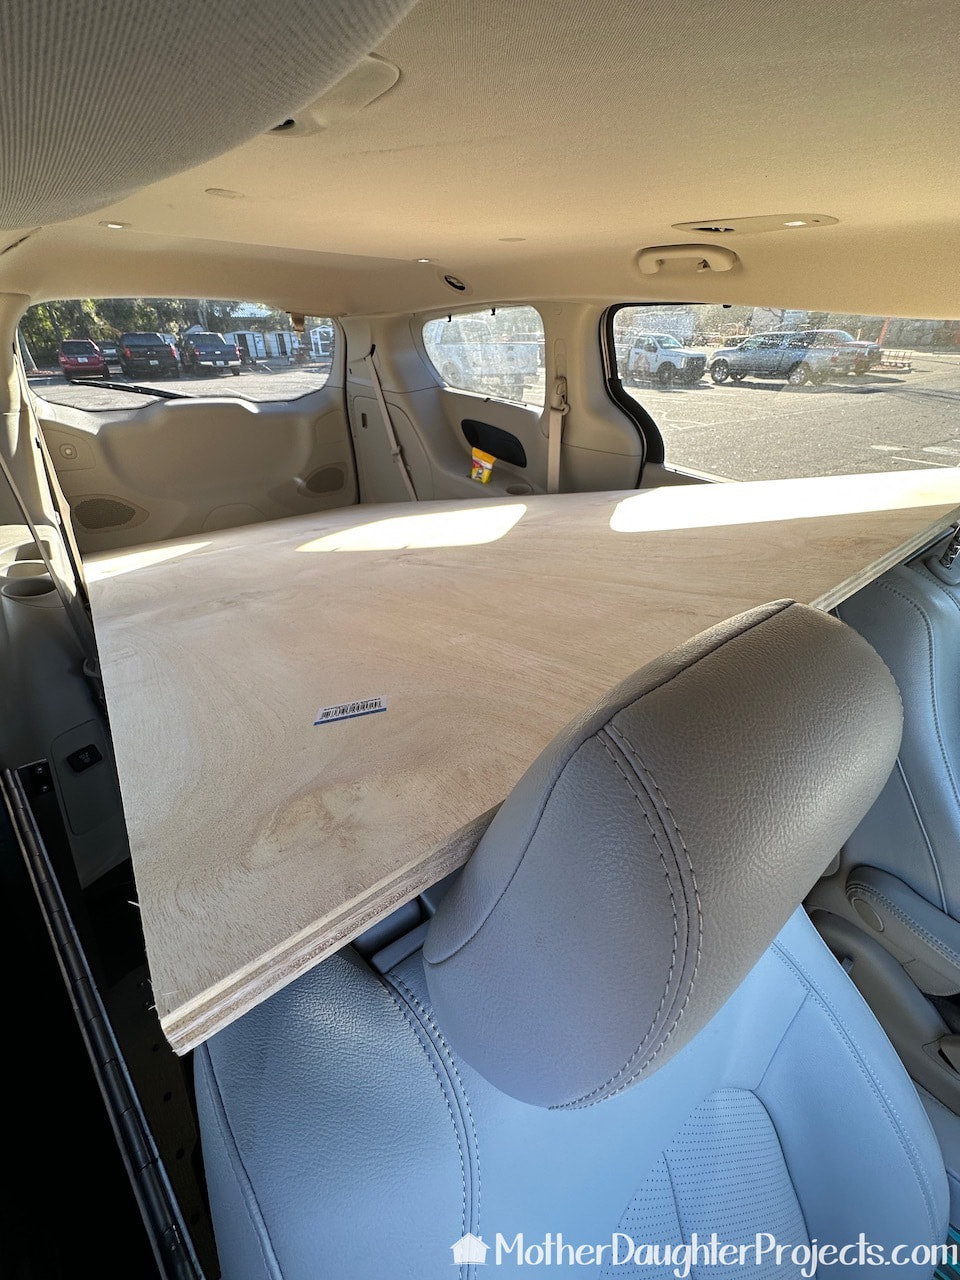 We carried the plywood home from Home Depot in our cargo van. 